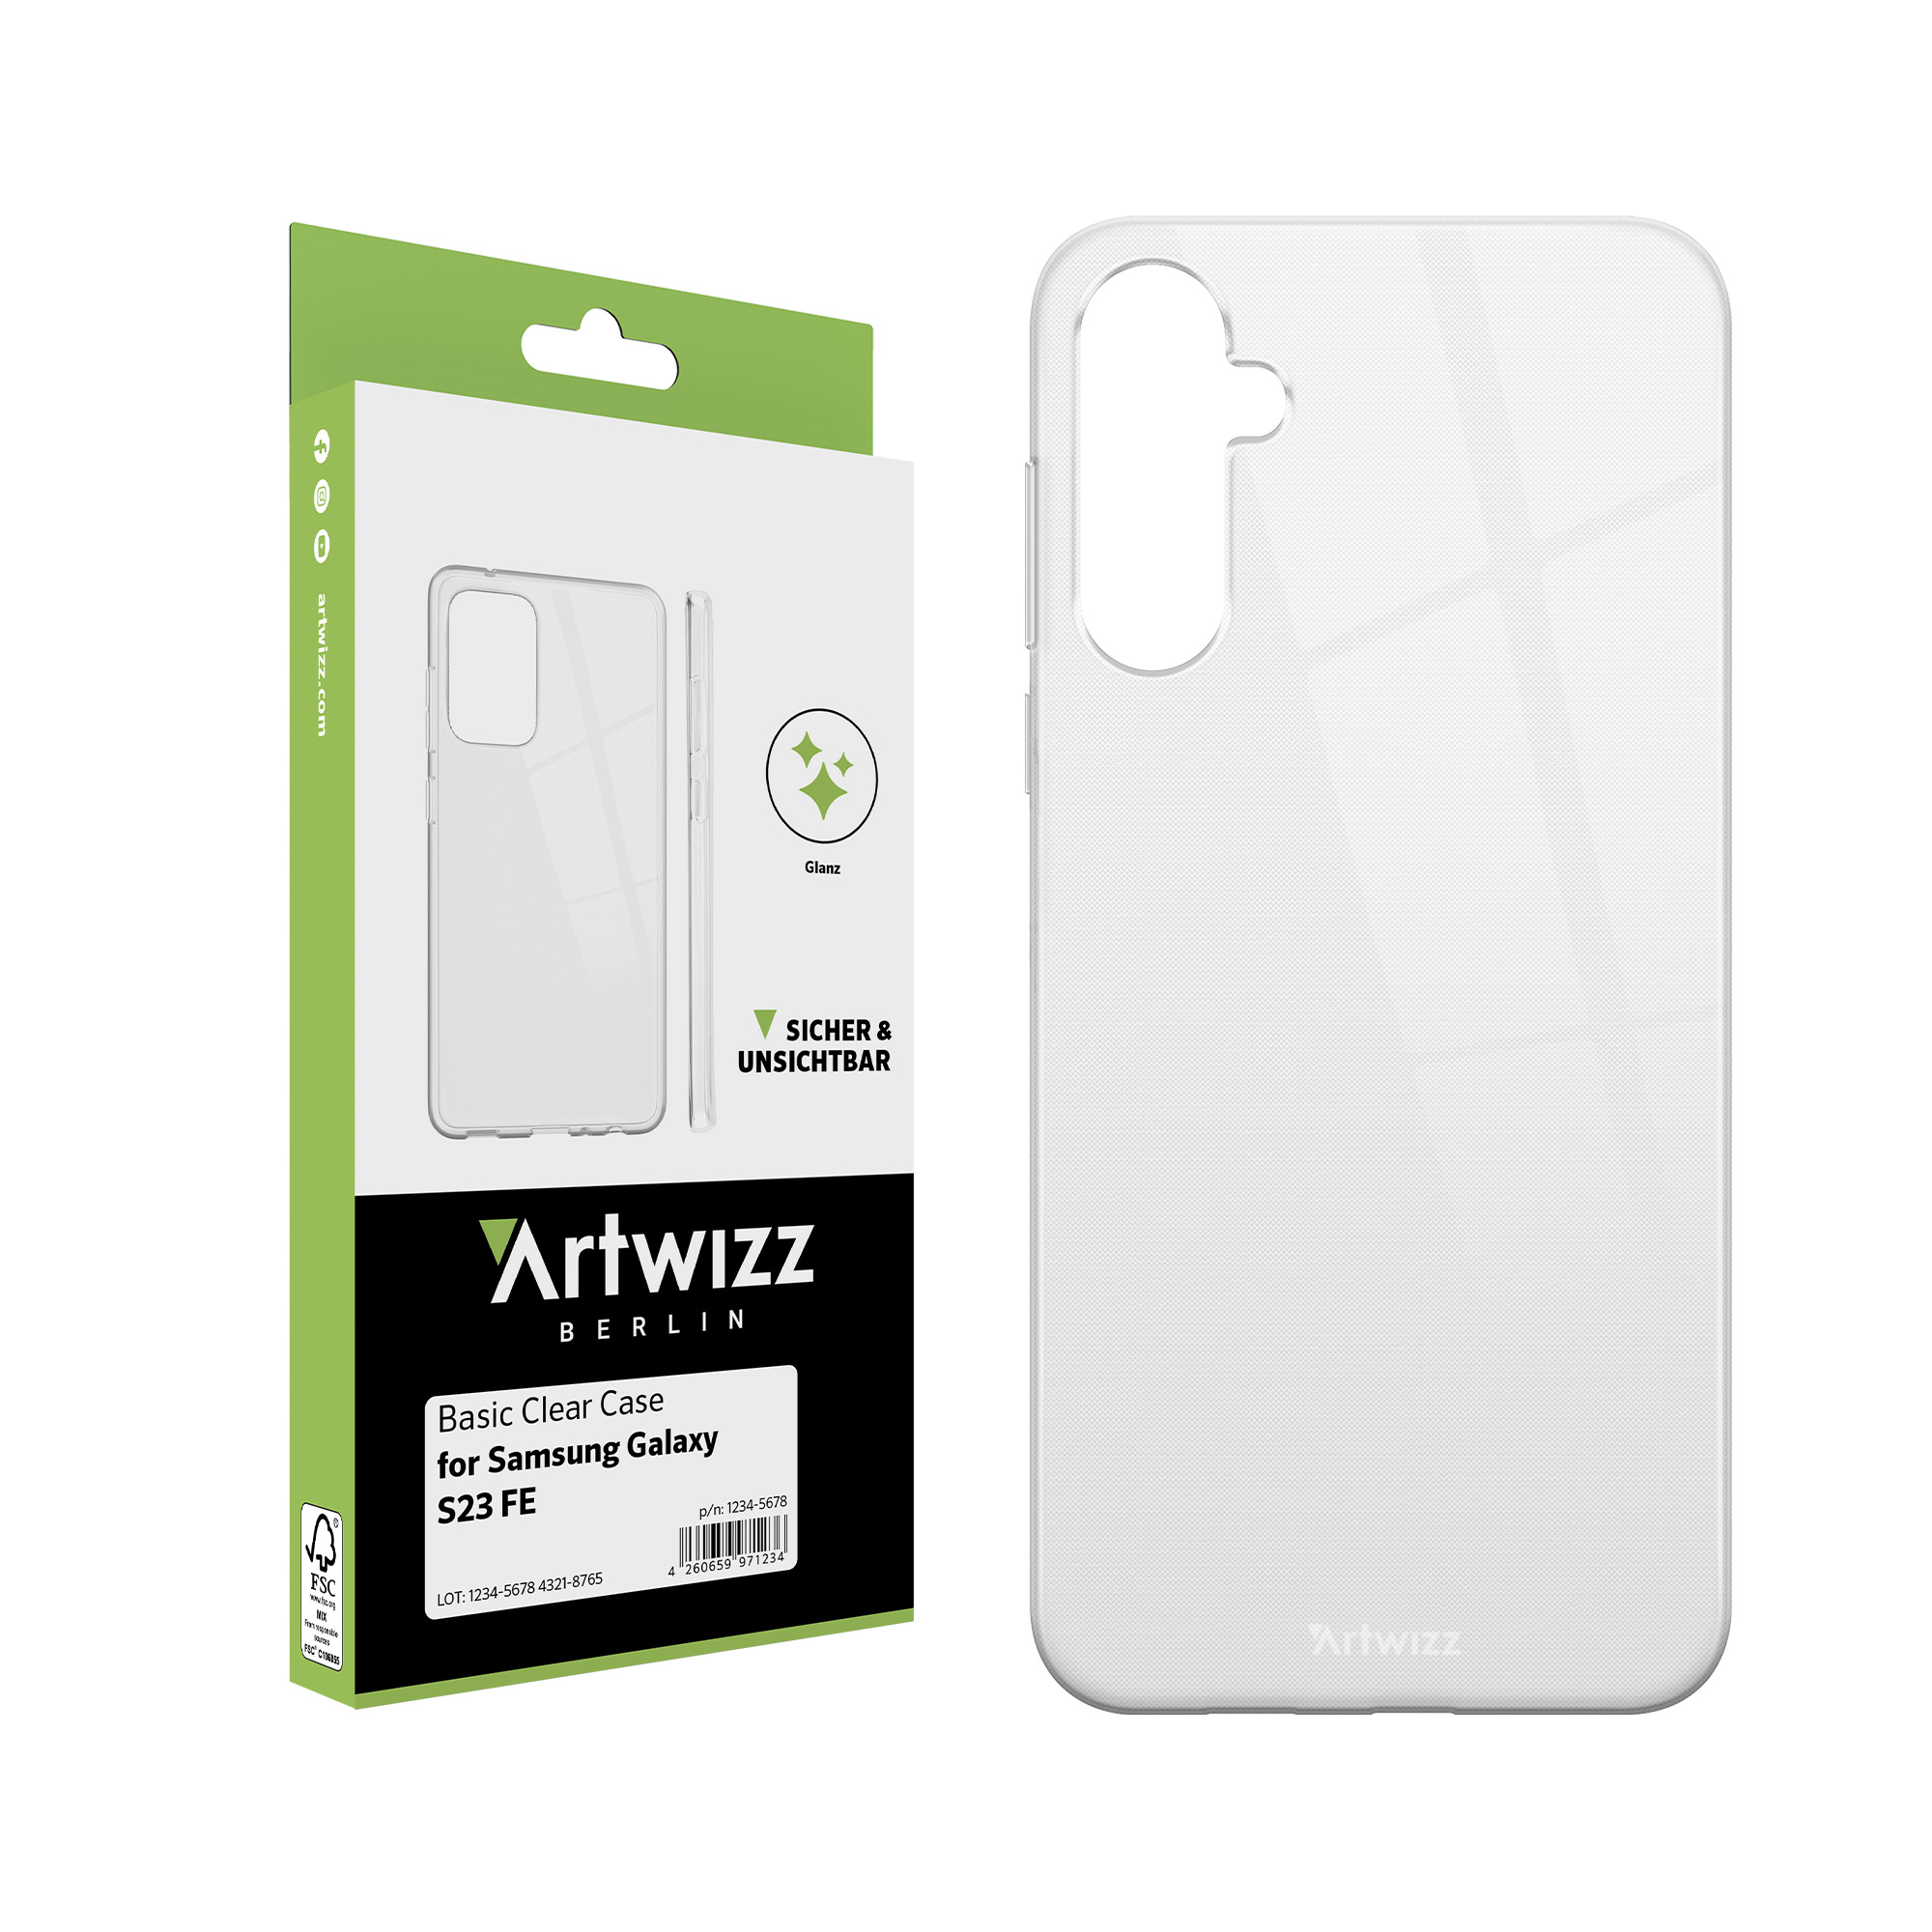 ARTWIZZ Basic Clear Backcover, Samsung, FE, Case, Transparent S23 Galaxy